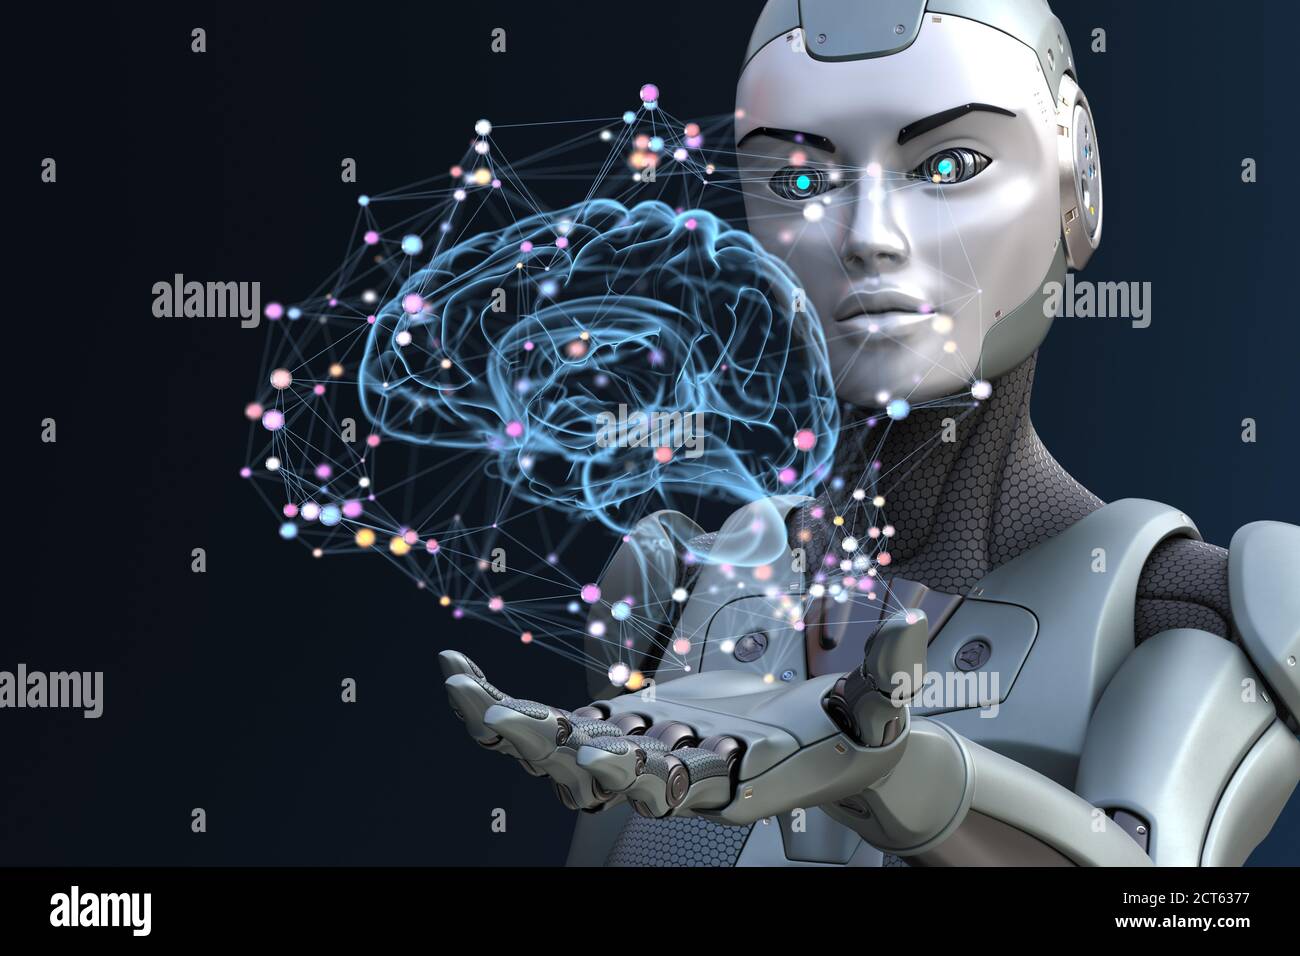 https://c8.alamy.com/comp/2CT6377/robot-with-artificial-intelligence-3d-illustration-2CT6377.jpg